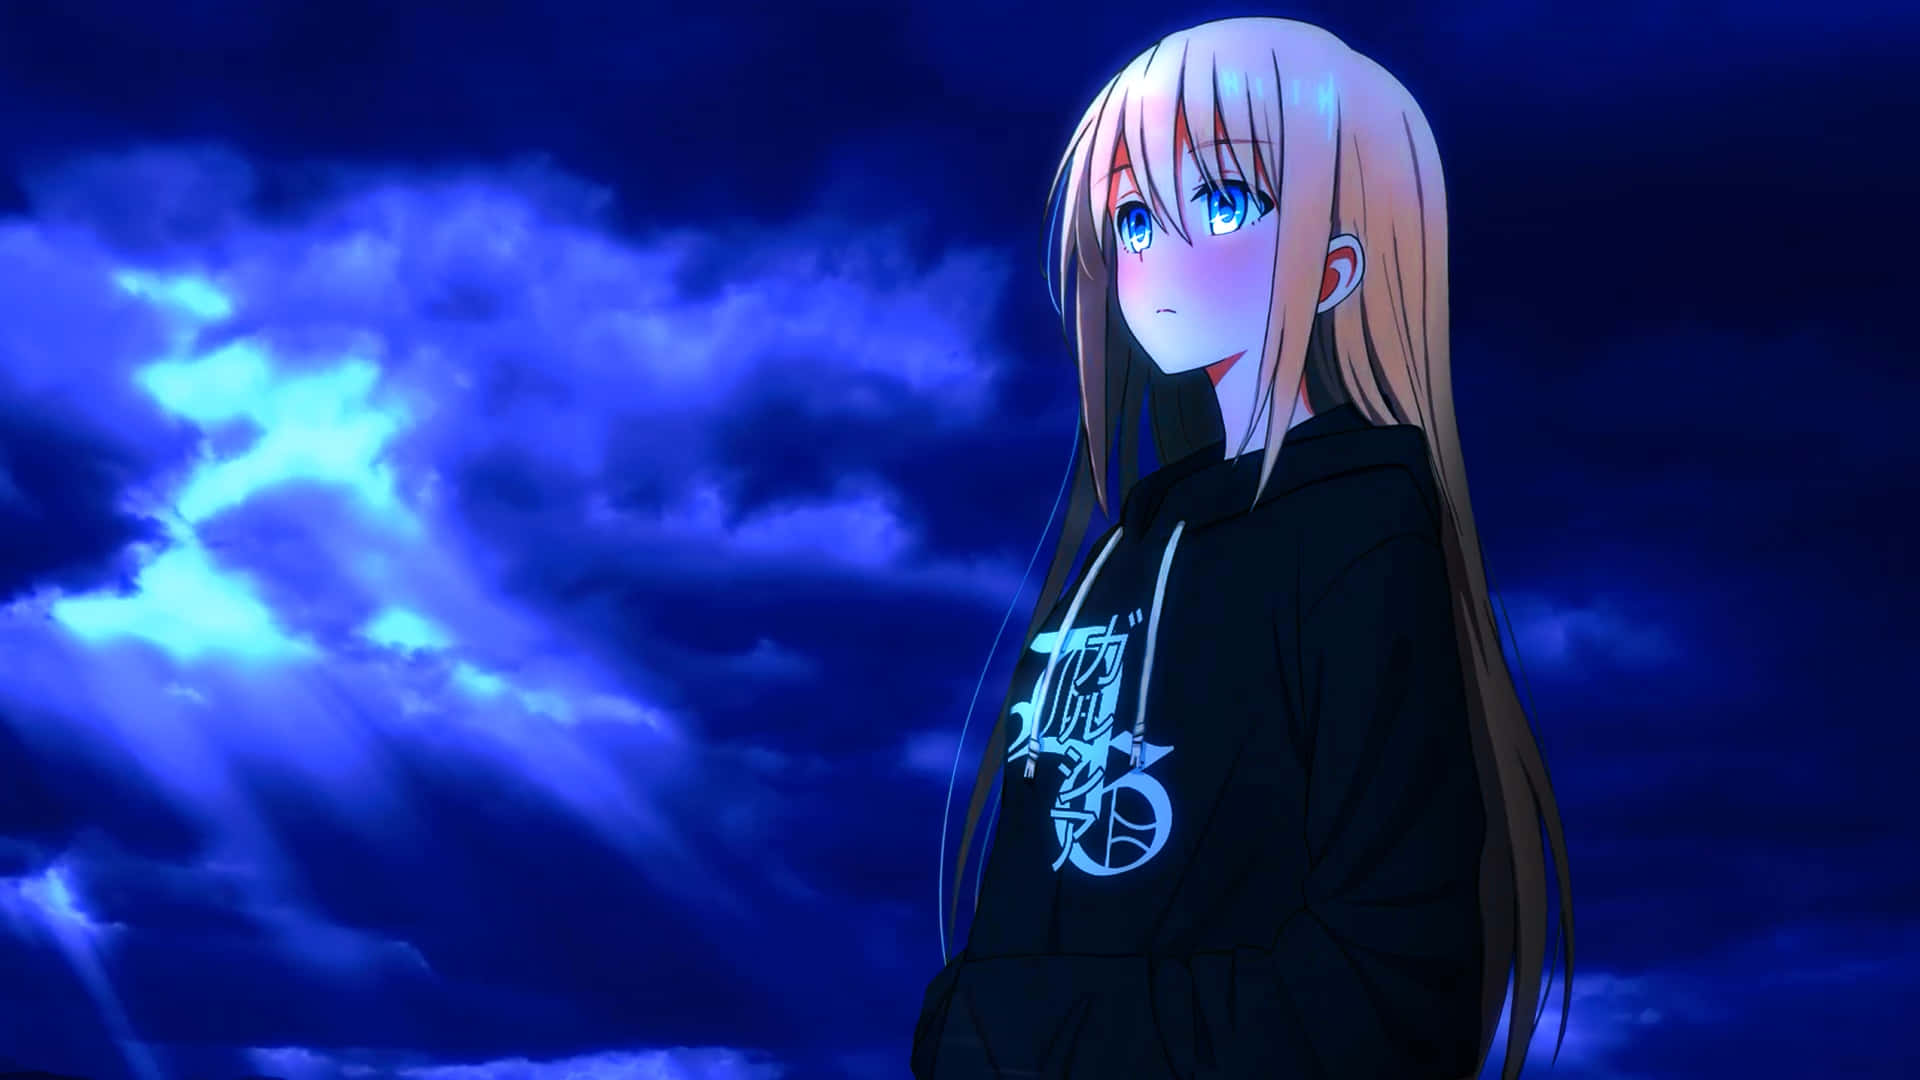 Blue Anime Background Blonde Anime Girl Looking At The Sky